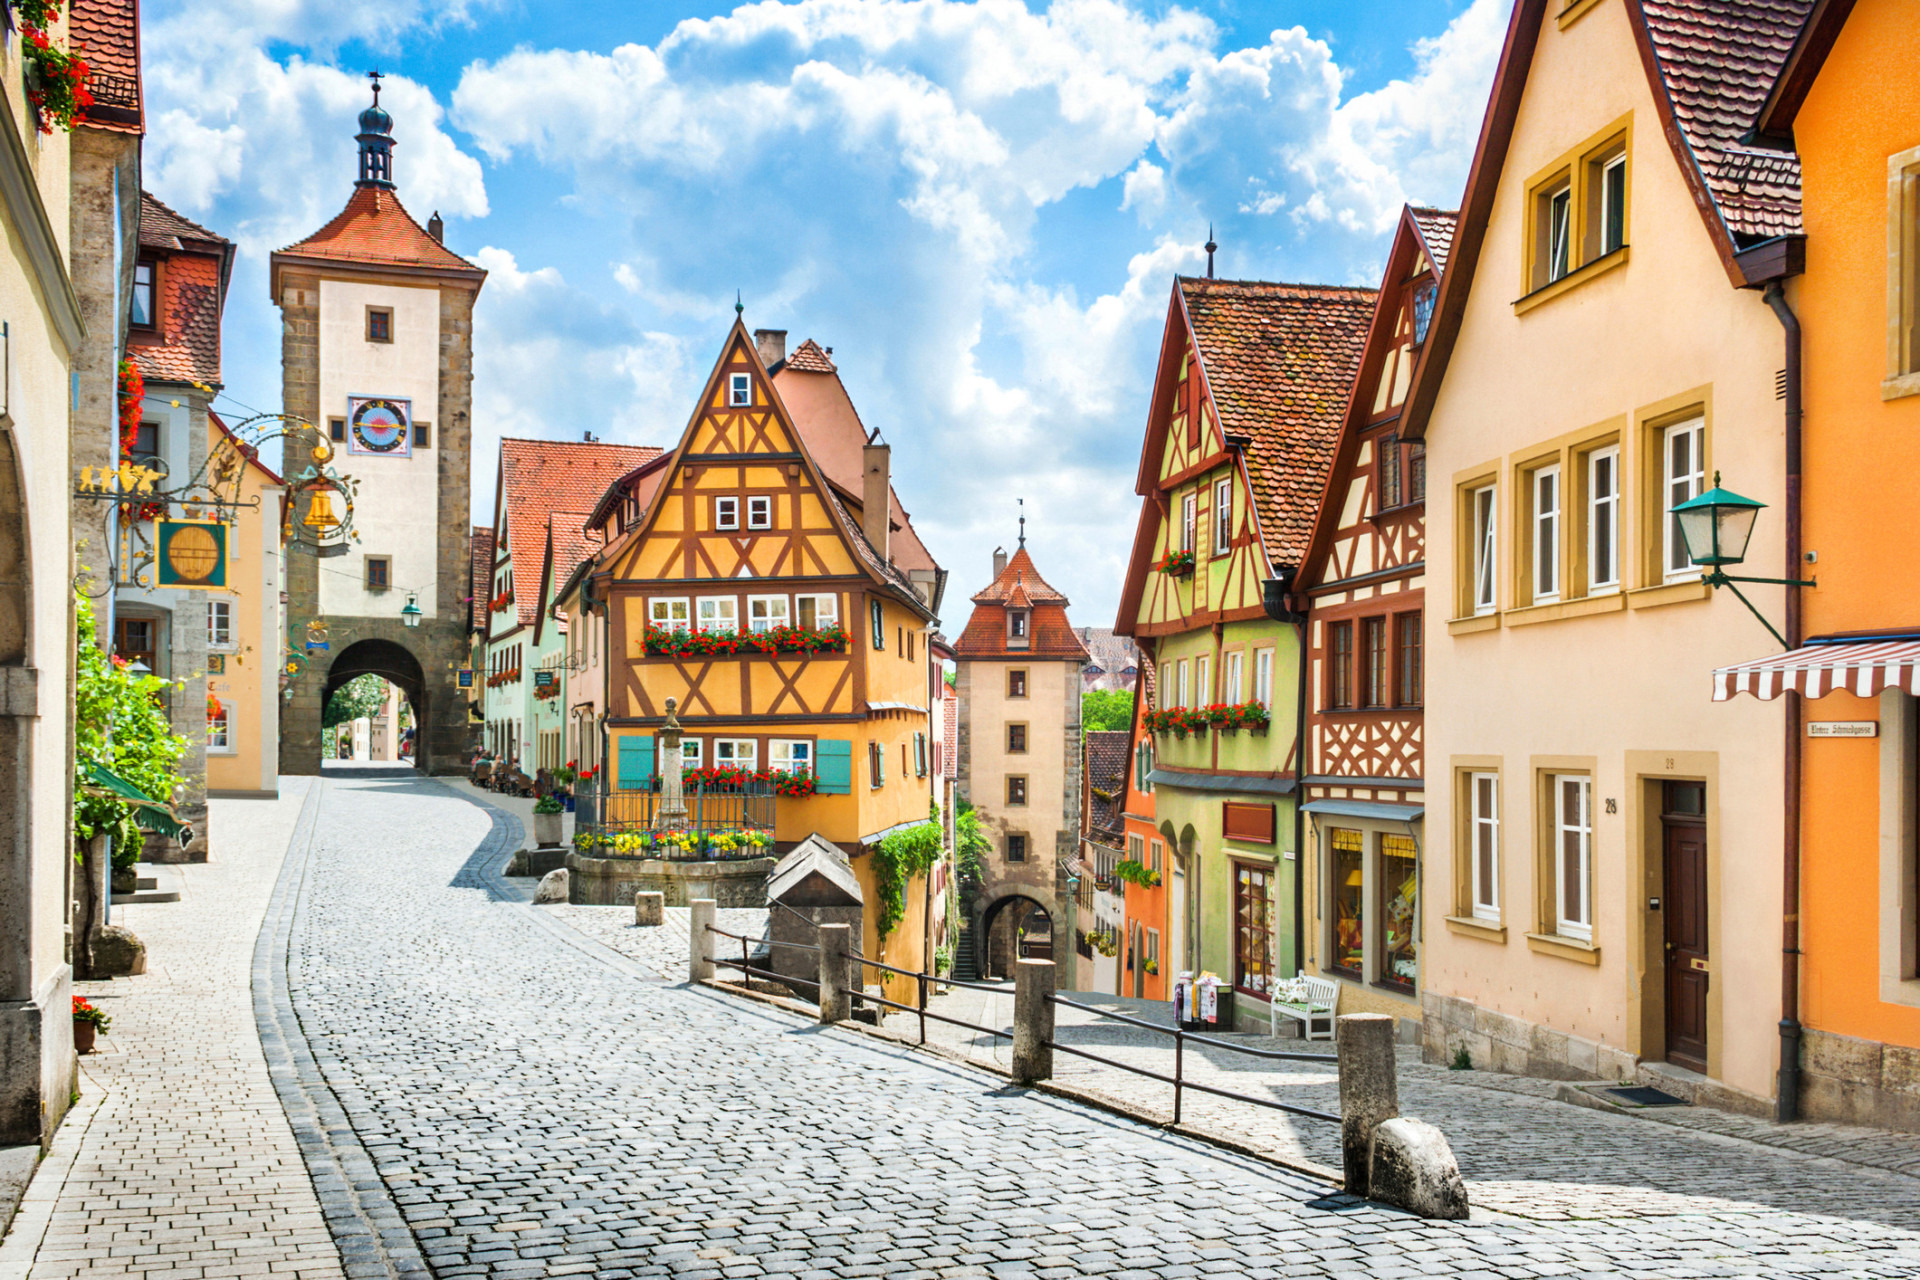 Germany's Bavaria region is bursting with history and culture, and most importantly: incredible beer!<p><a href="https://www.msn.com/en-us/community/channel/vid-7xx8mnucu55yw63we9va2gwr7uihbxwc68fxqp25x6tg4ftibpra?cvid=94631541bc0f4f89bfd59158d696ad7e">Follow us and access great exclusive content every day</a></p>